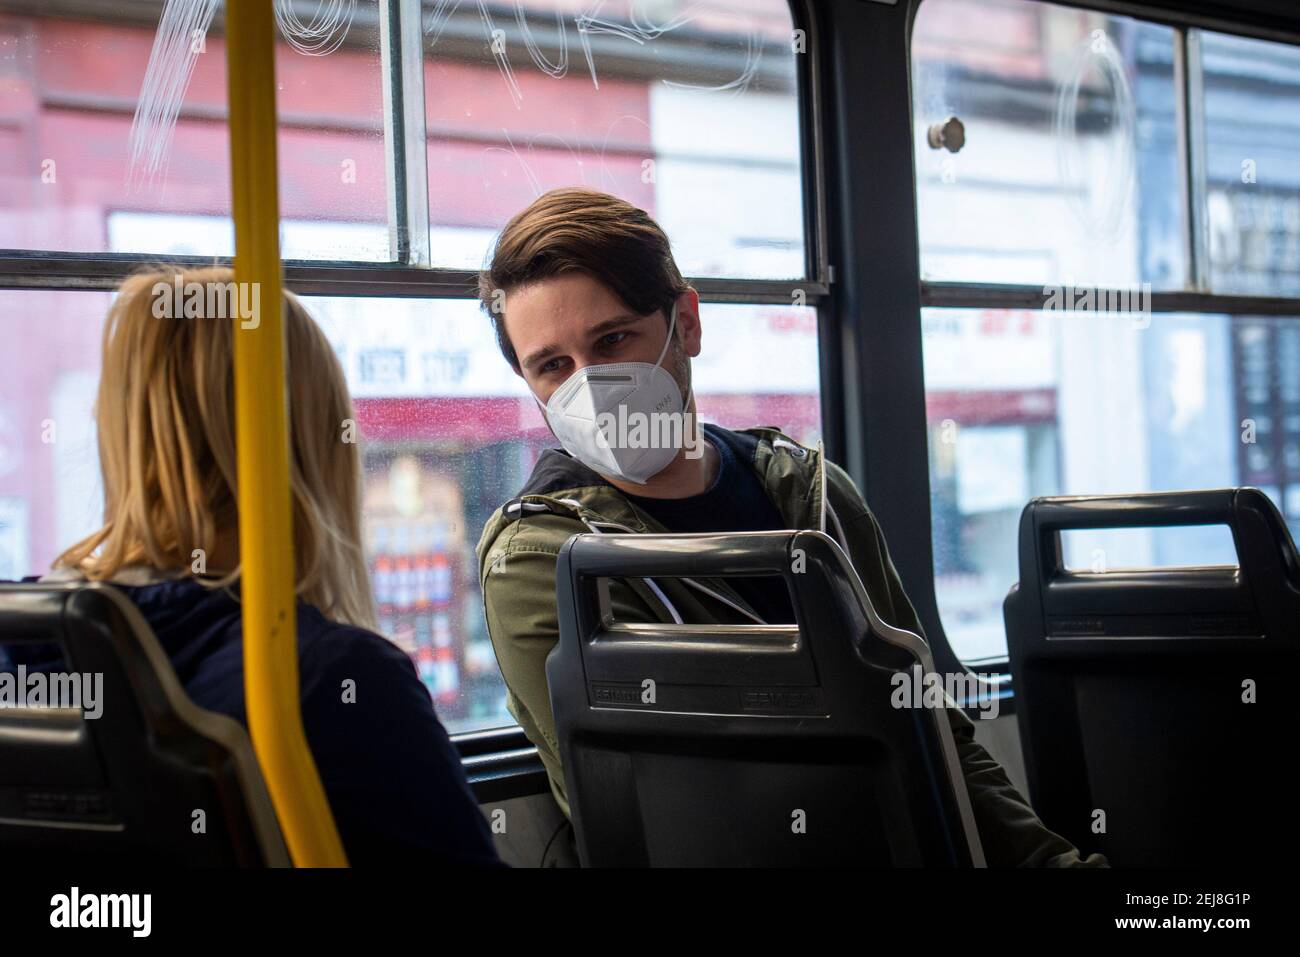 Prague, Czech Republic. 20th Feb, 2021. People with respirators in public transport, on Saturday, February 20, 2021, in Prague, Czech Republic. Health Ministry orders wearing of respirators, nano masks or two surgical face masks in shops, public transport and other public places from Monday, February 22. Credit: Katerina Sulova/CTK Photo/Alamy Live News Stock Photo